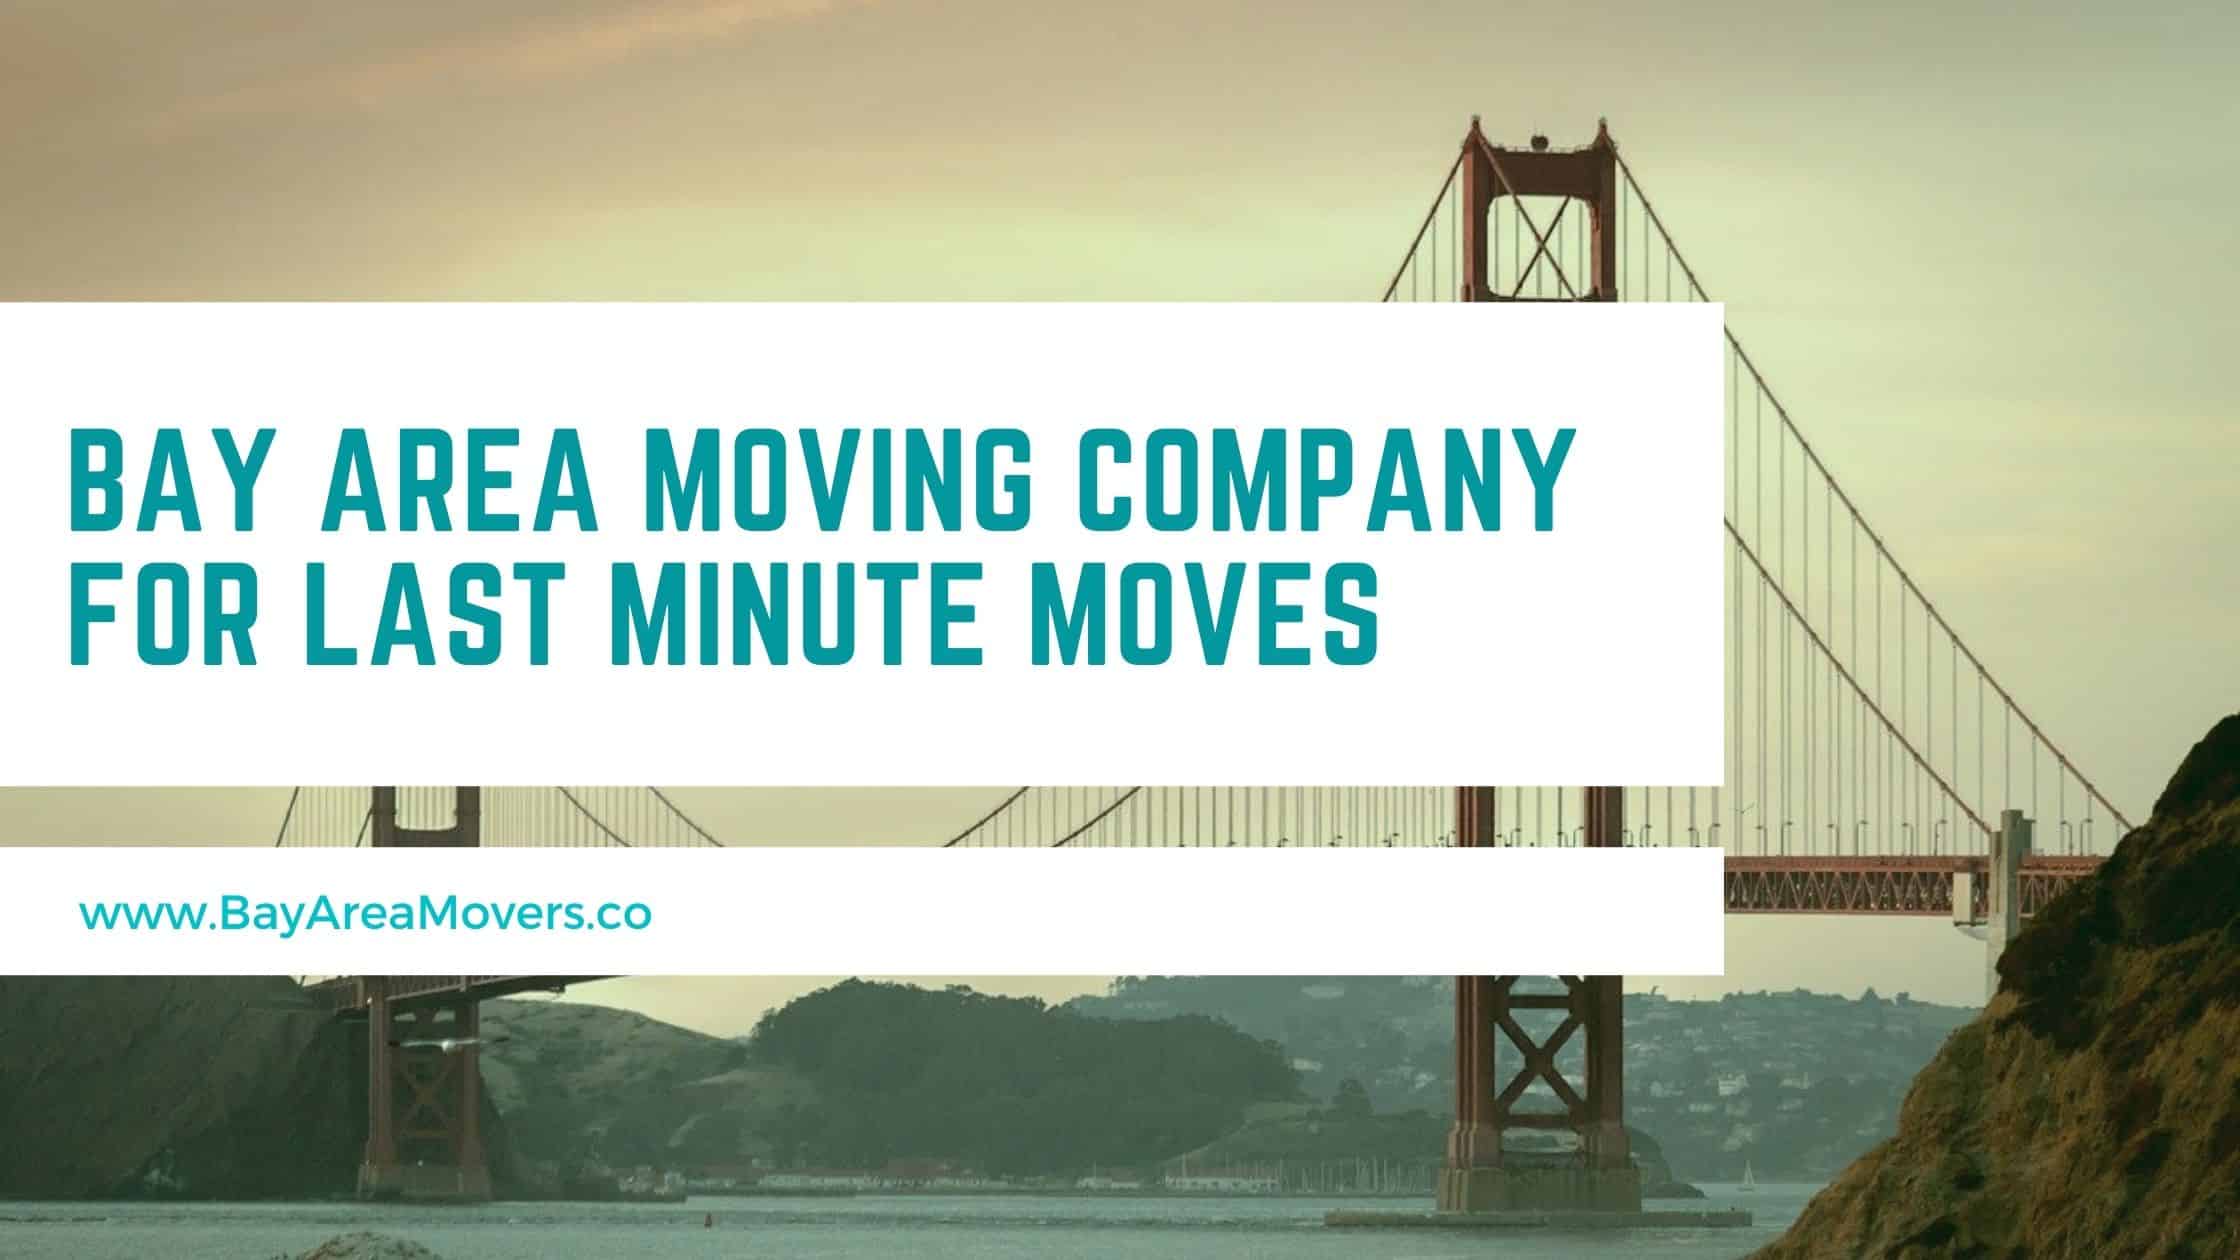 Bay Area Moving Company for Last Minute Moves